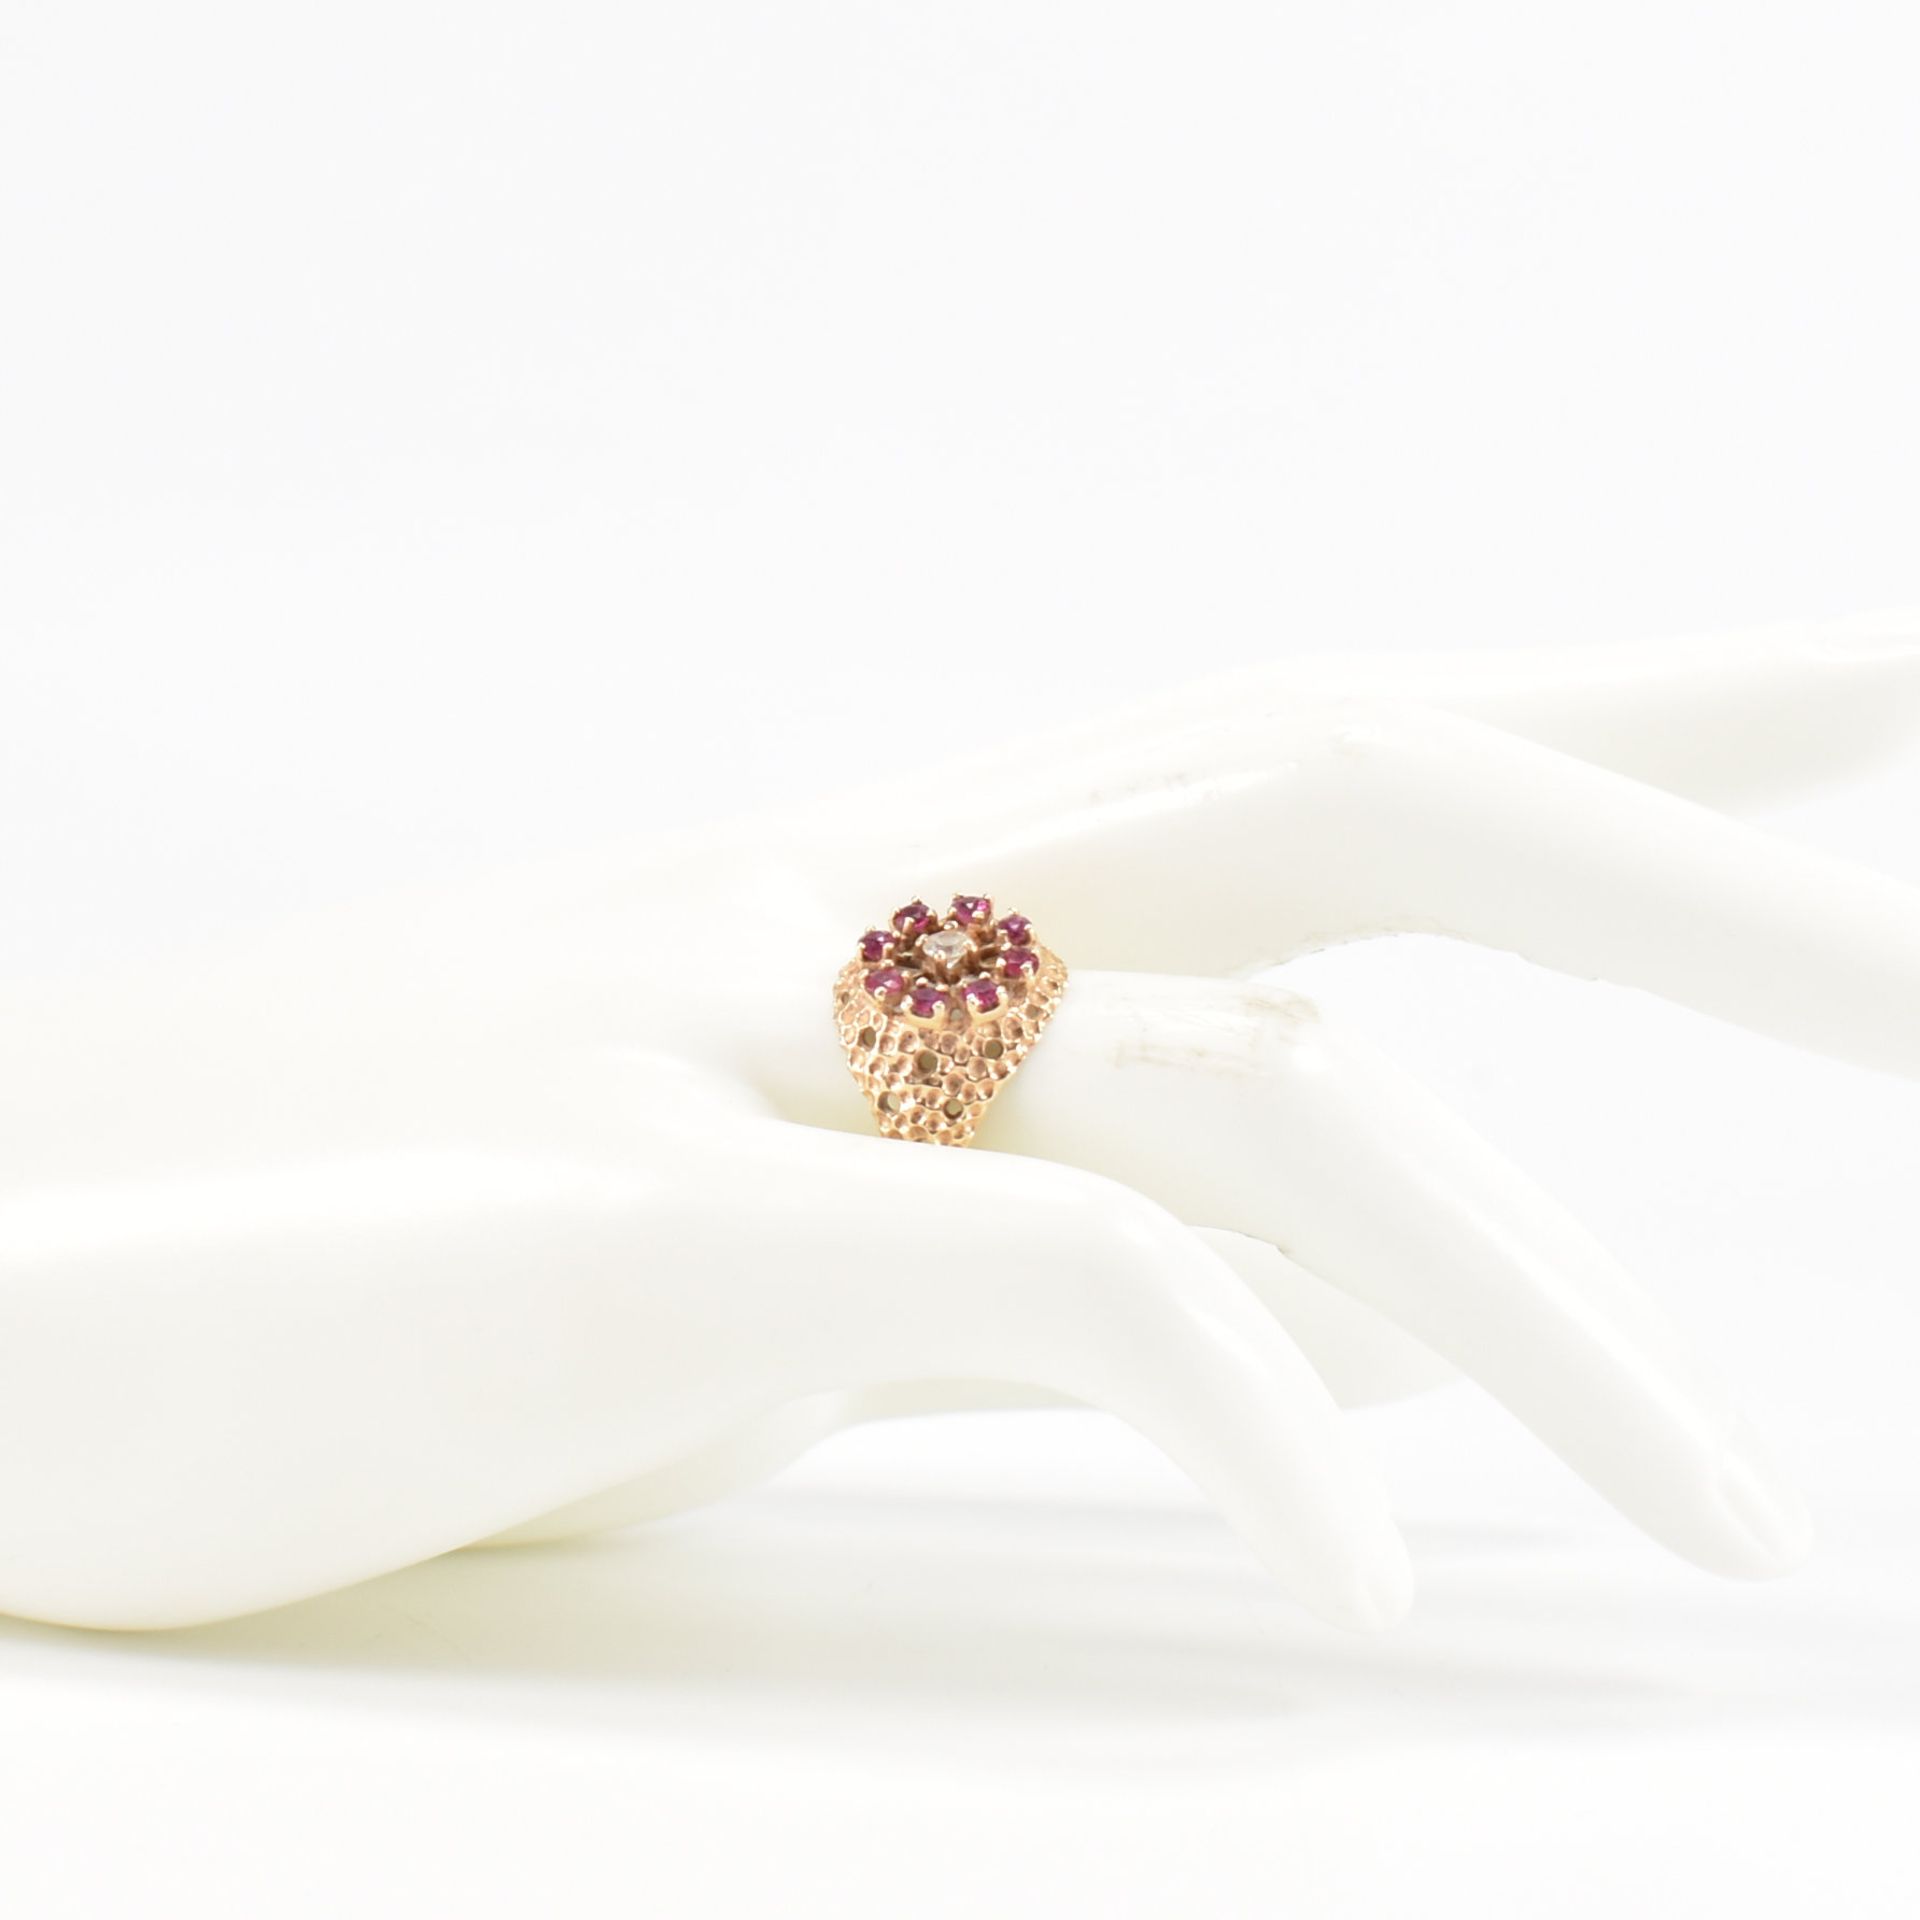 HALLMARKED 9CT GOLD RUBY & WHITE STONE RING - Image 8 of 8